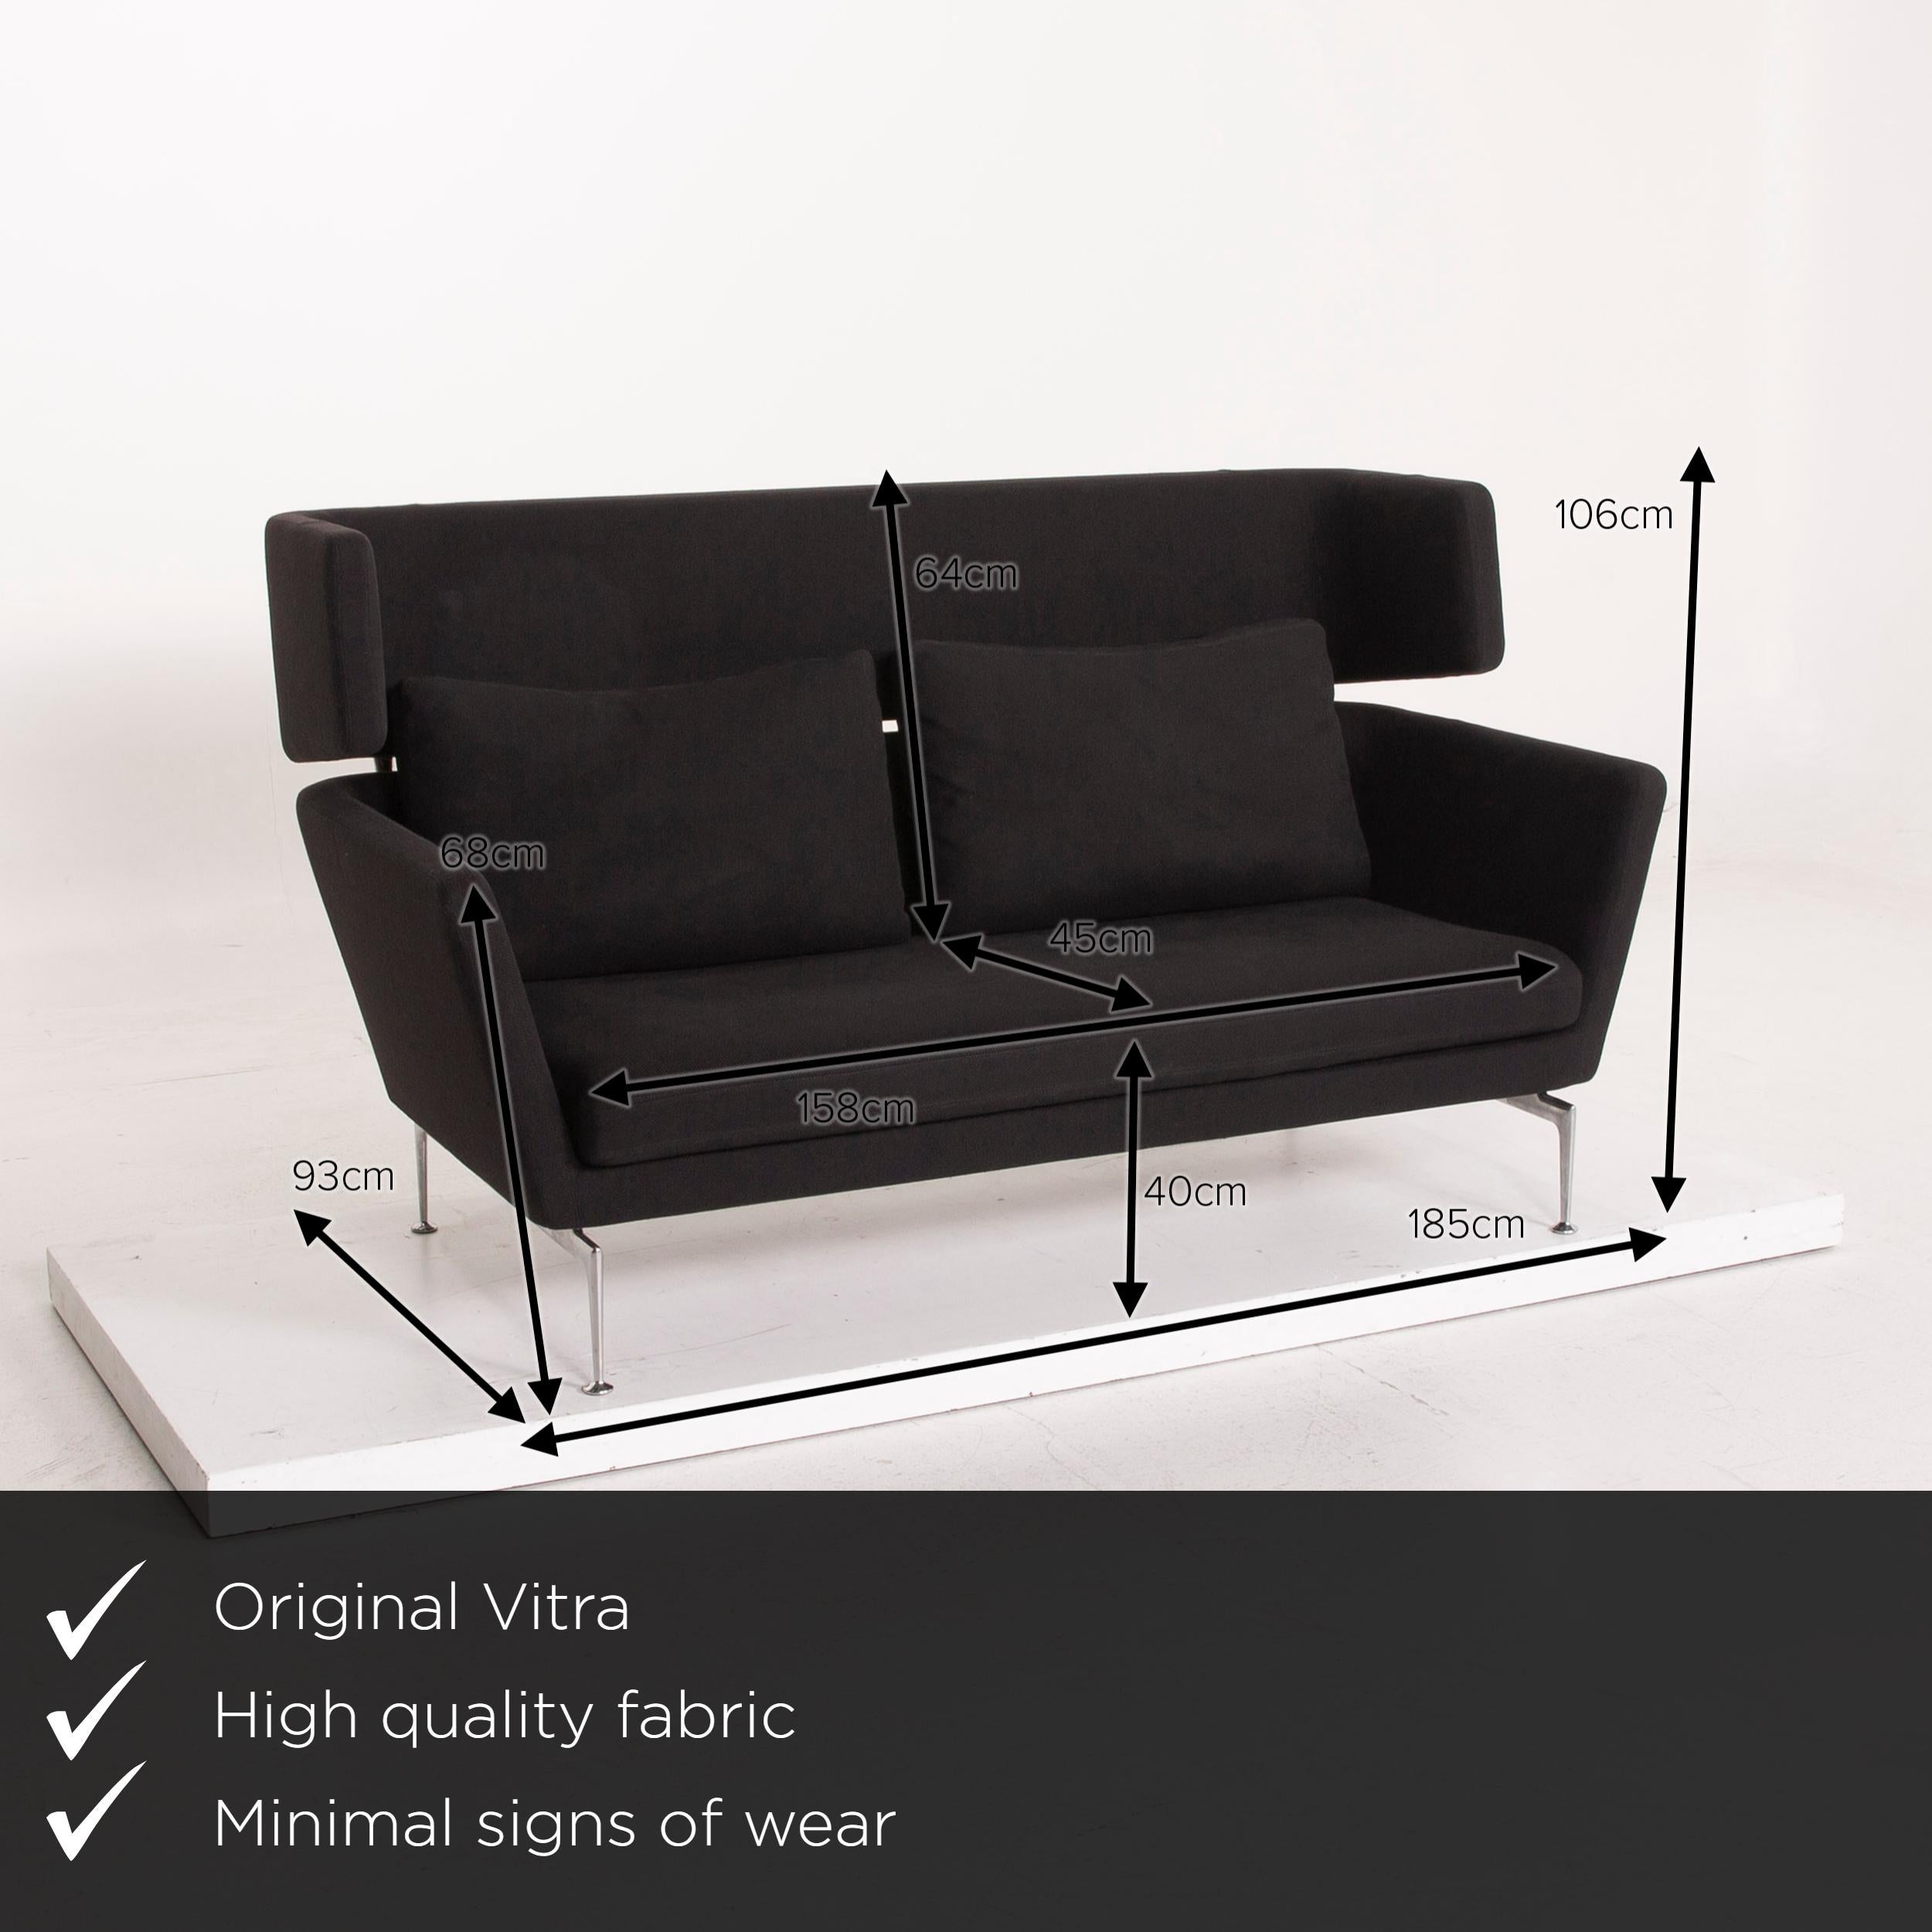 We present to you a Vitra Suita fabric sofa anthracite two-seat.

 

 Product measurements in centimeters:
 

Depth 93
Width 185
Height 106
Seat height 40
Rest height 68
Seat depth 45
Seat width 158
Back height 64.